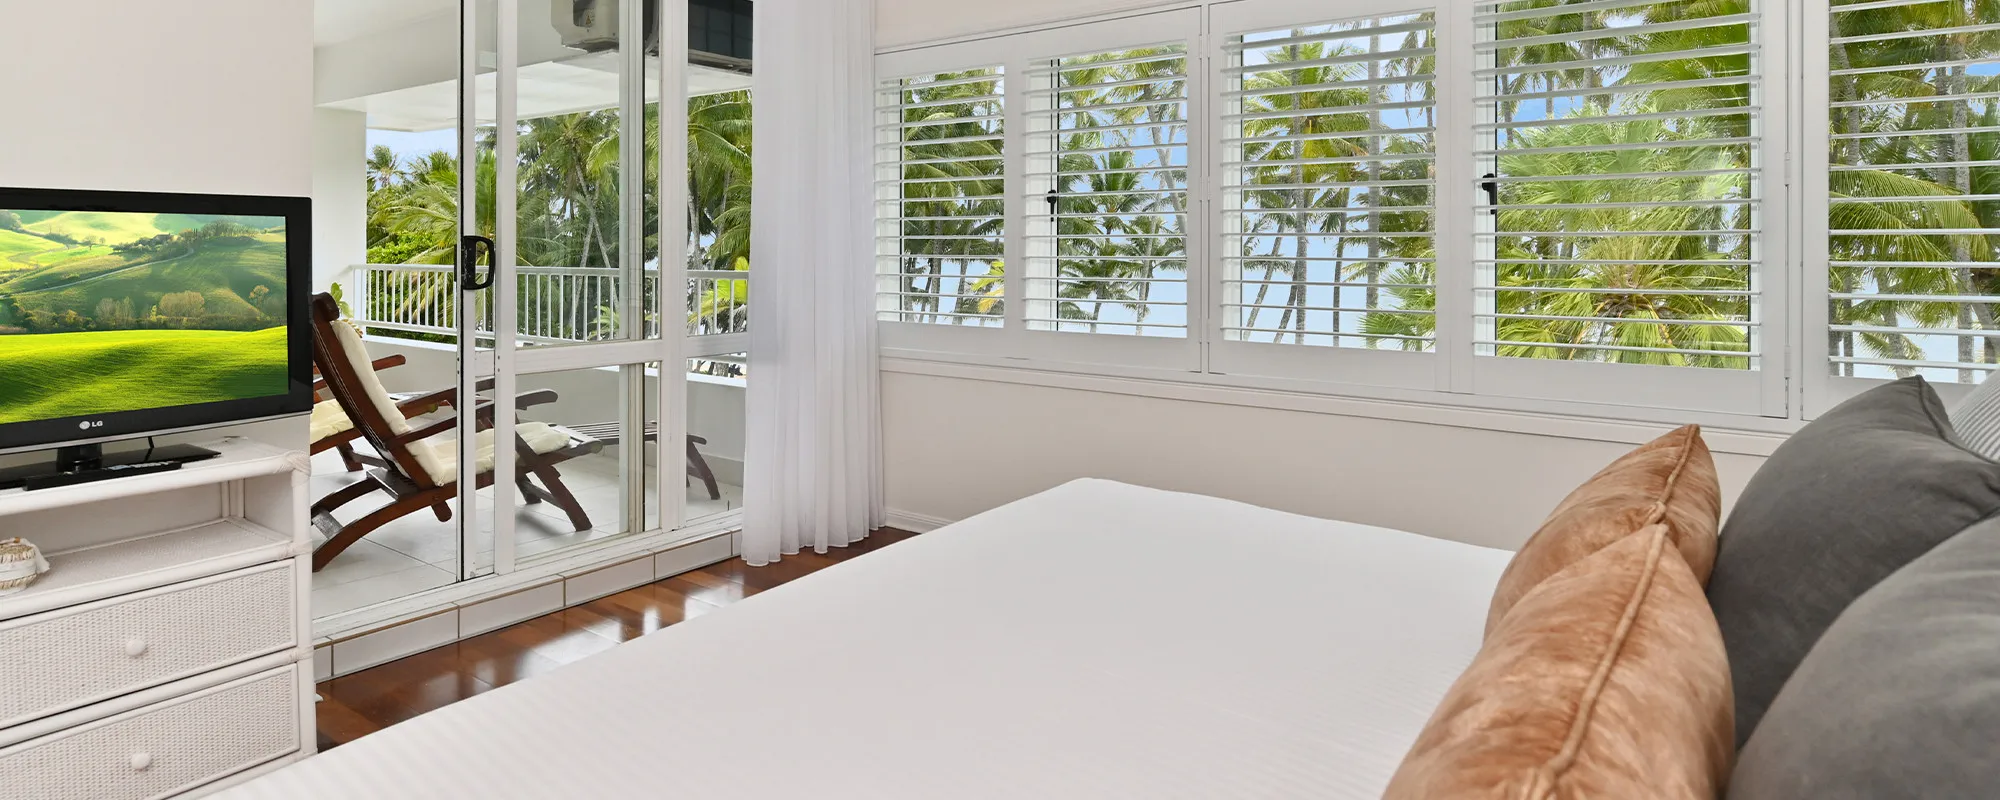 Alamanda Palm Cove by Lancemore Boutique Luxury Accommodation Four Bedroom Apartment 2000 x 800 11